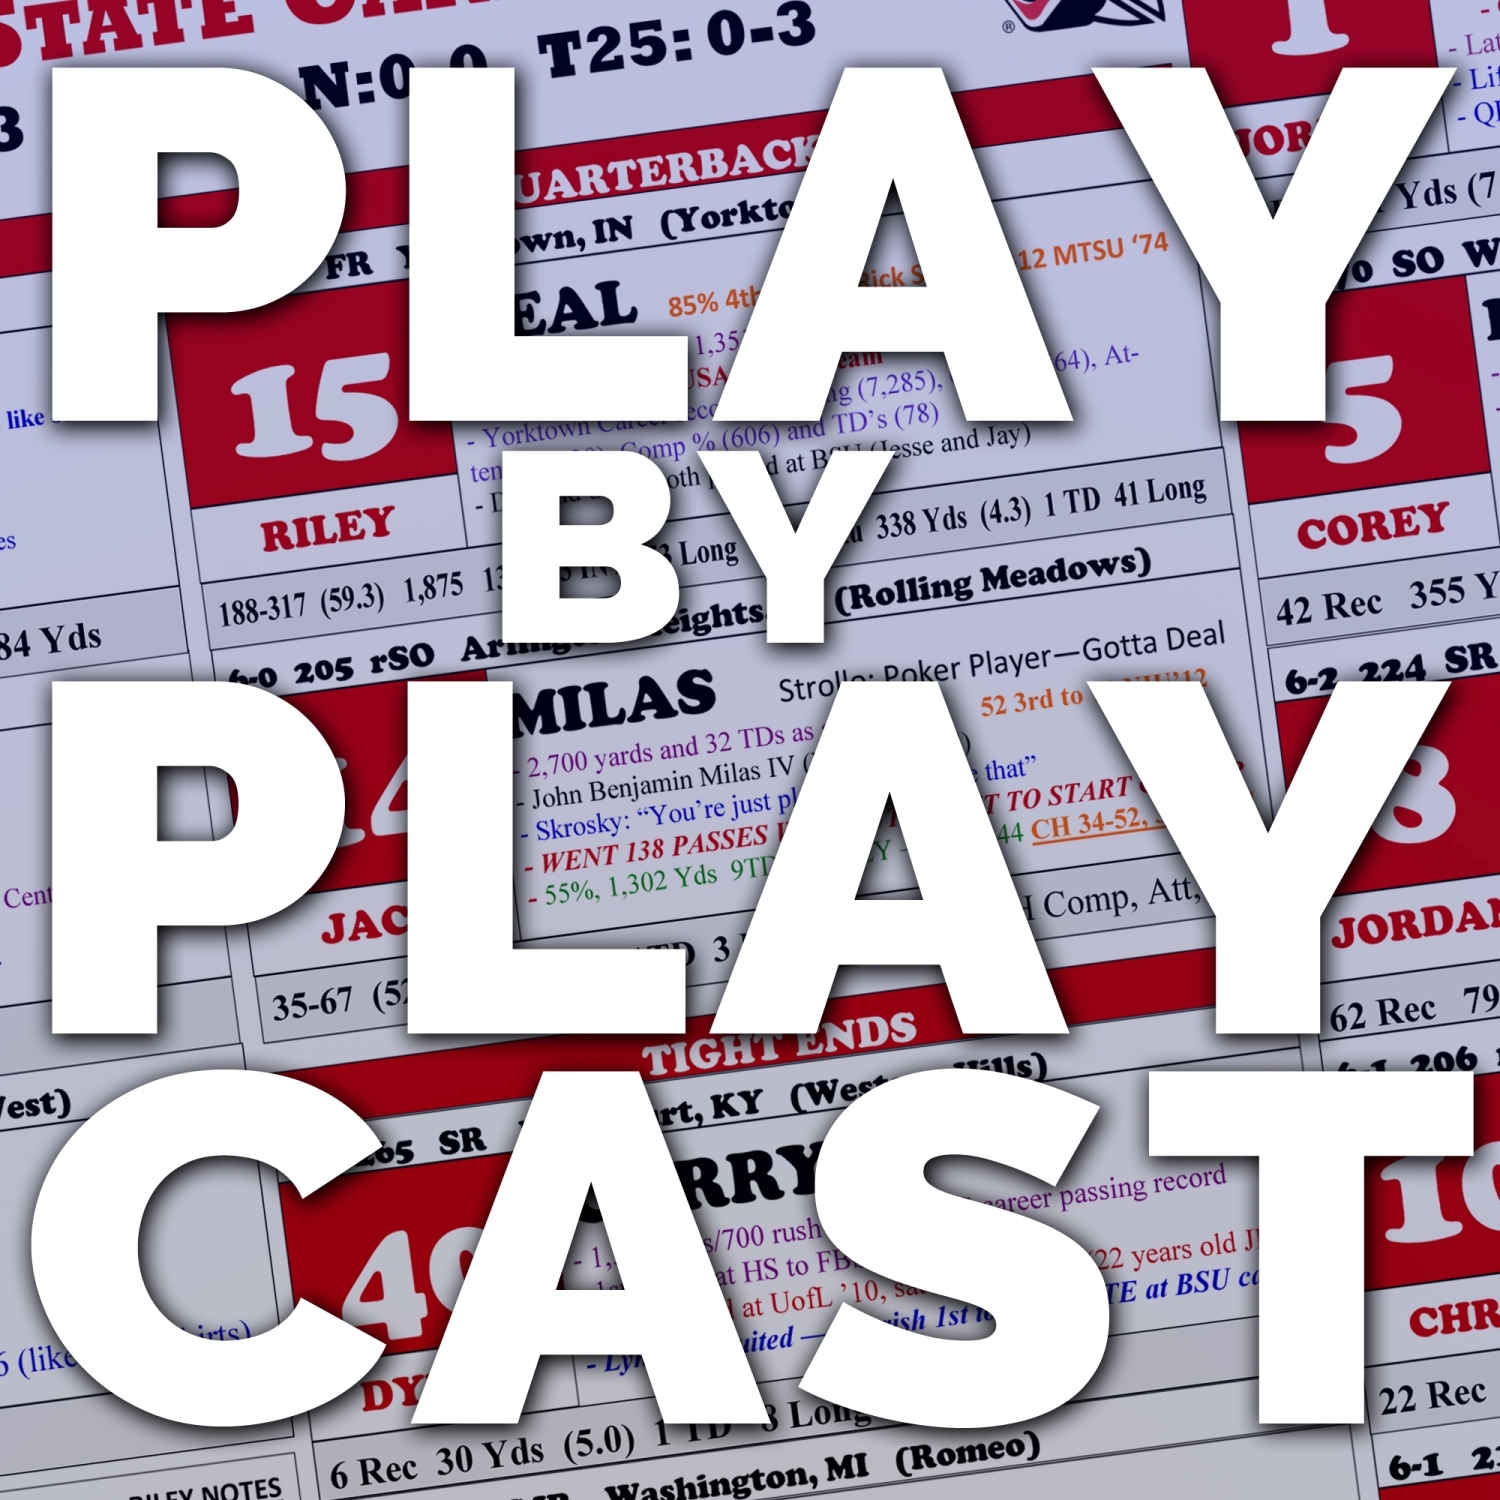 Play-by-Playcast Ep. 9 (Bill Hillgrove / Pitt Panthers & Steelers)